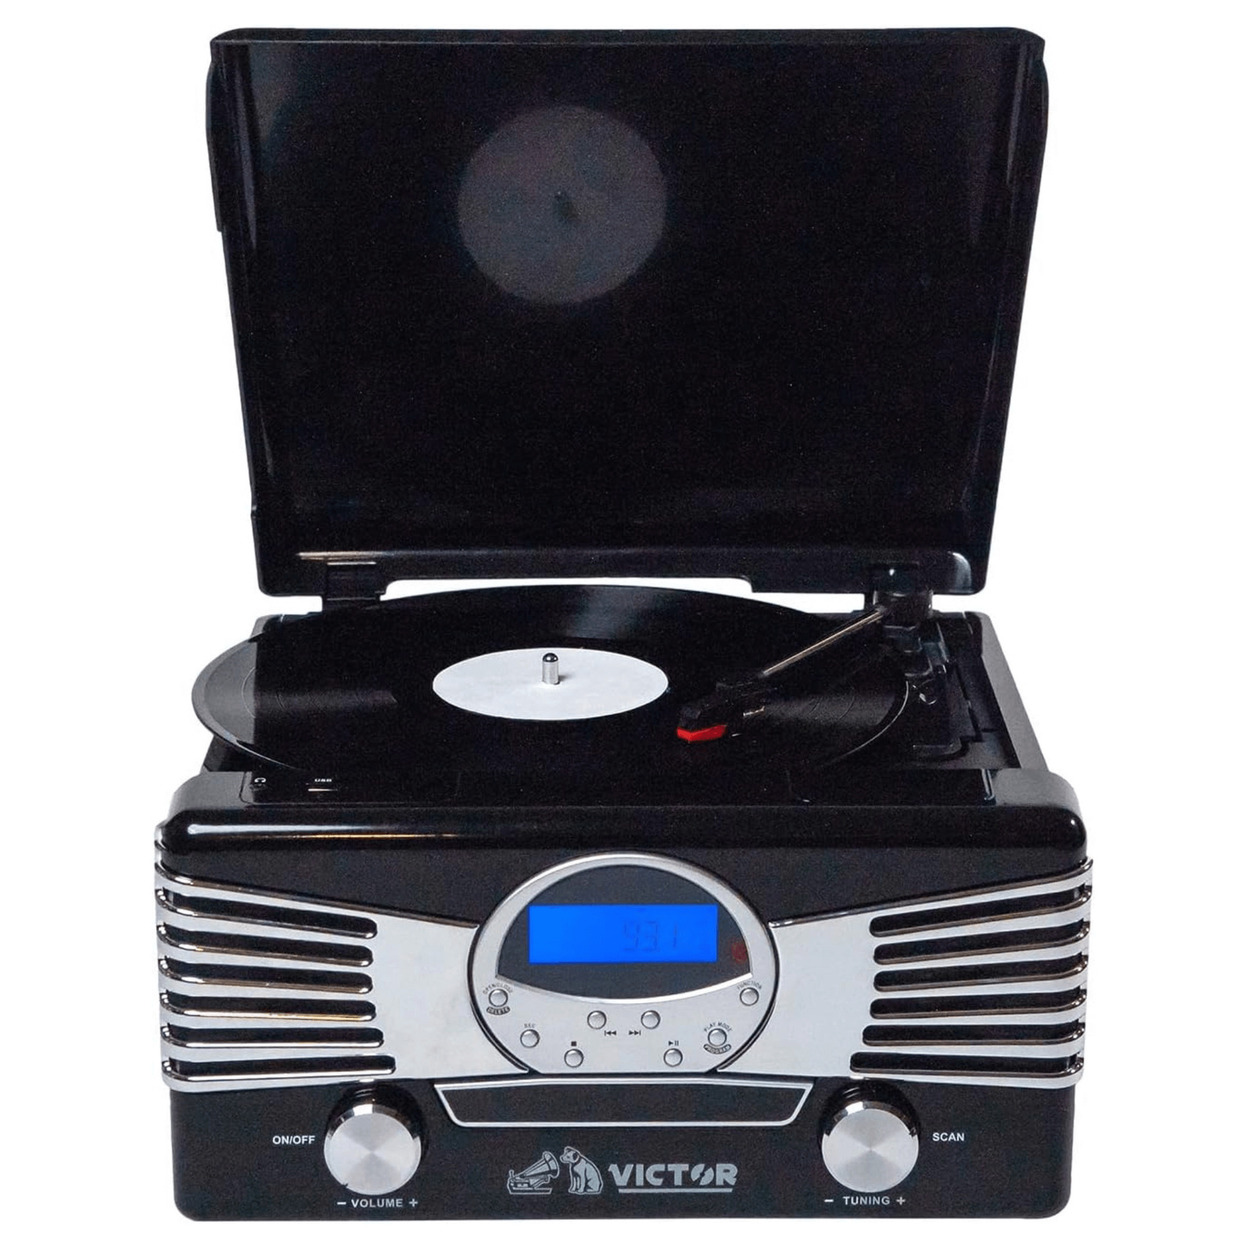 Victor Diner 7-in-1 Turntable Music Center With CD & MP3 Player And Bluetooth Function - Turquoise